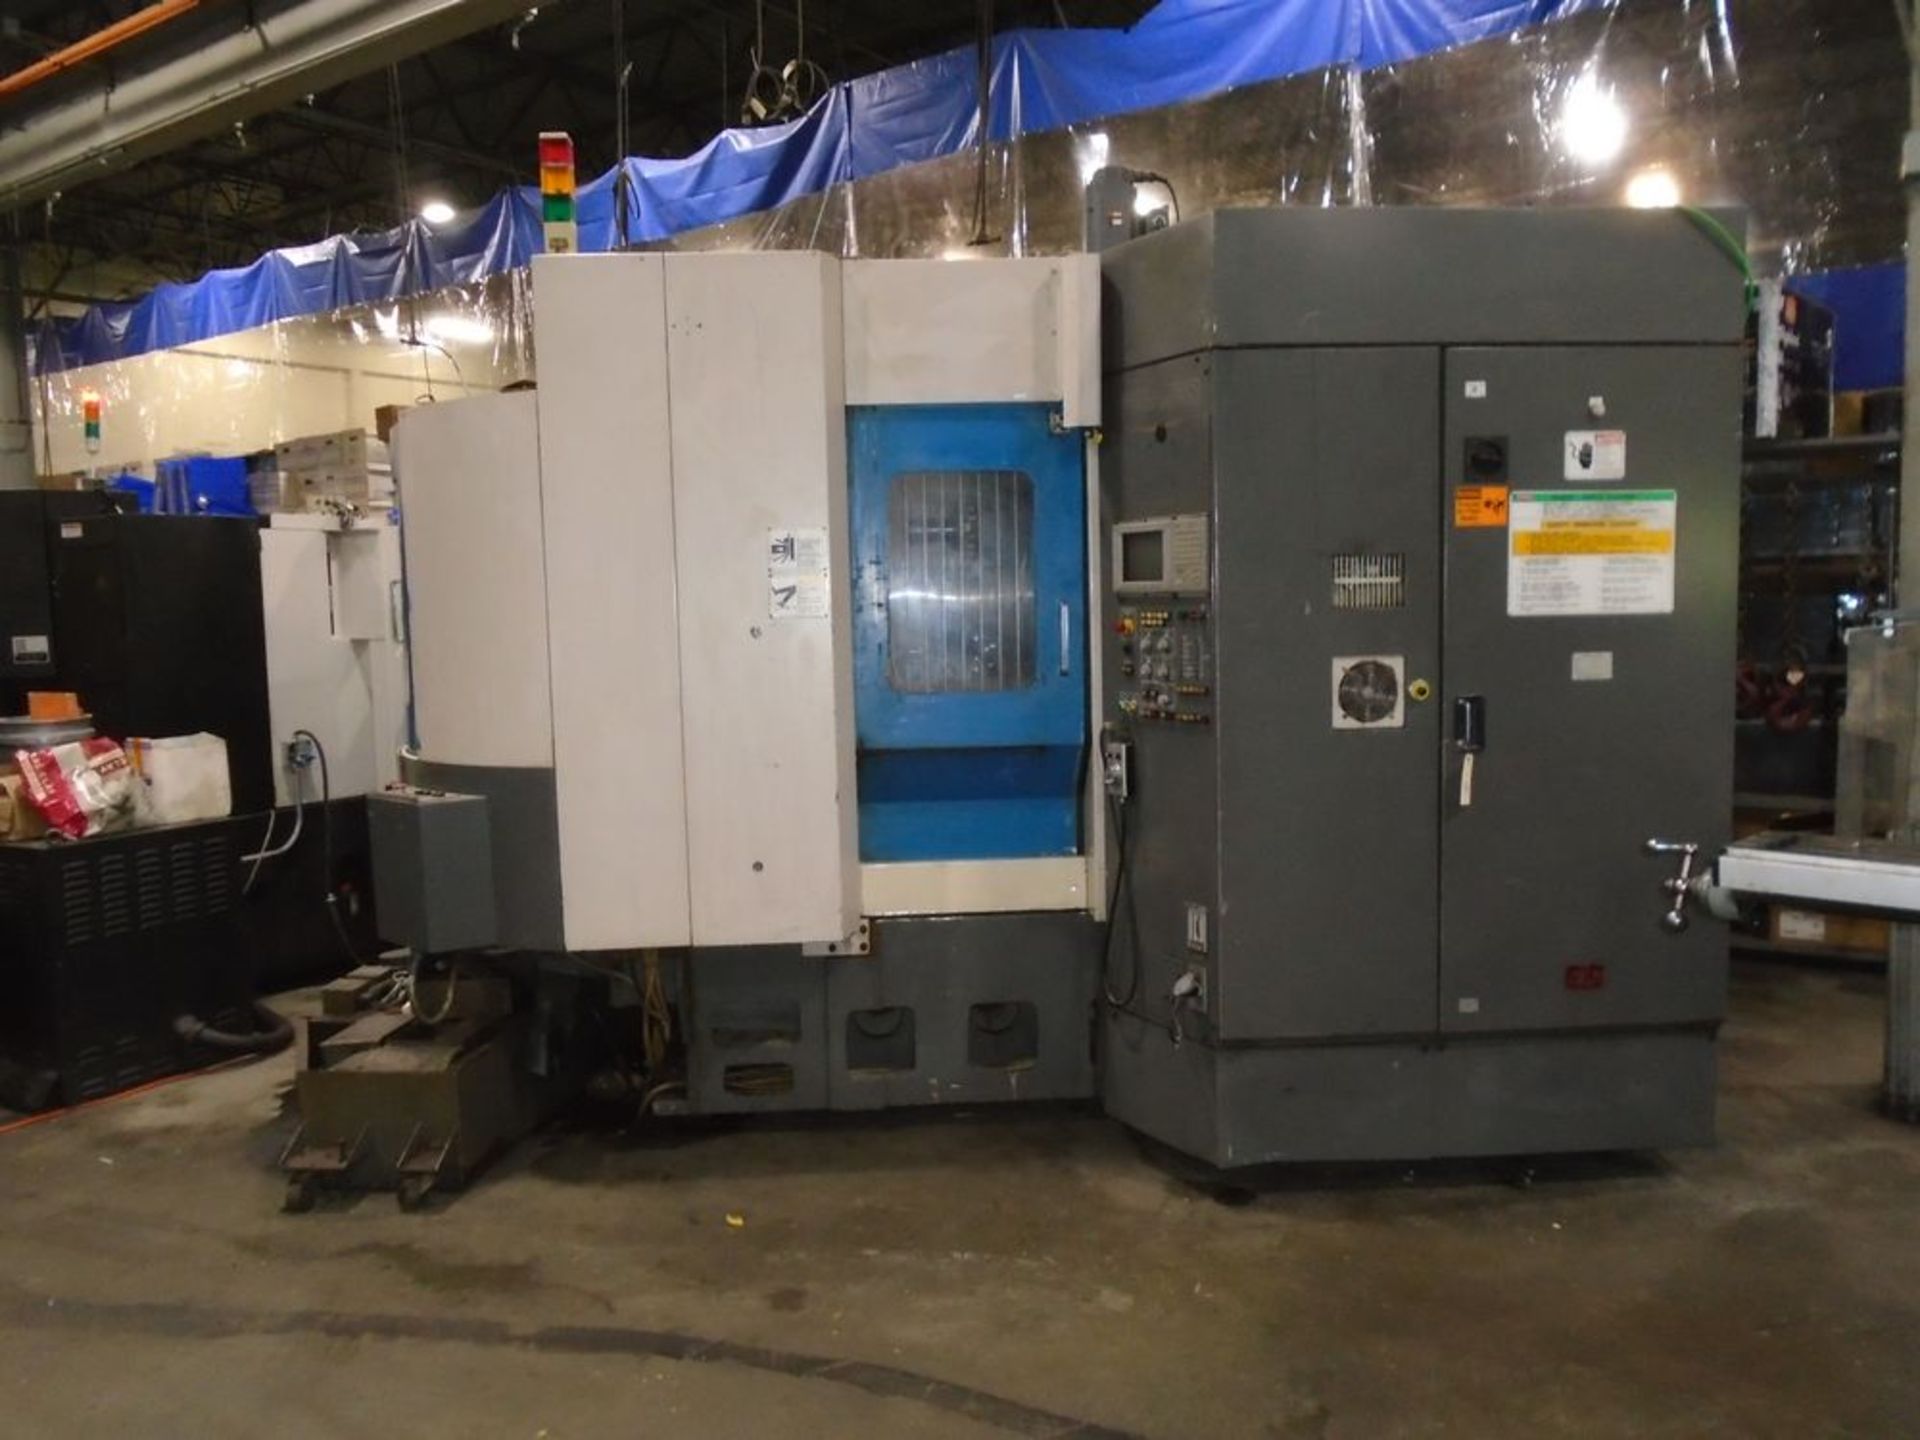 Toyoda FA-450II Horizontal Machining Center / CNC MillSPECIFICATIONS:PALLET DIMENSIONS: 17.7 x 17.